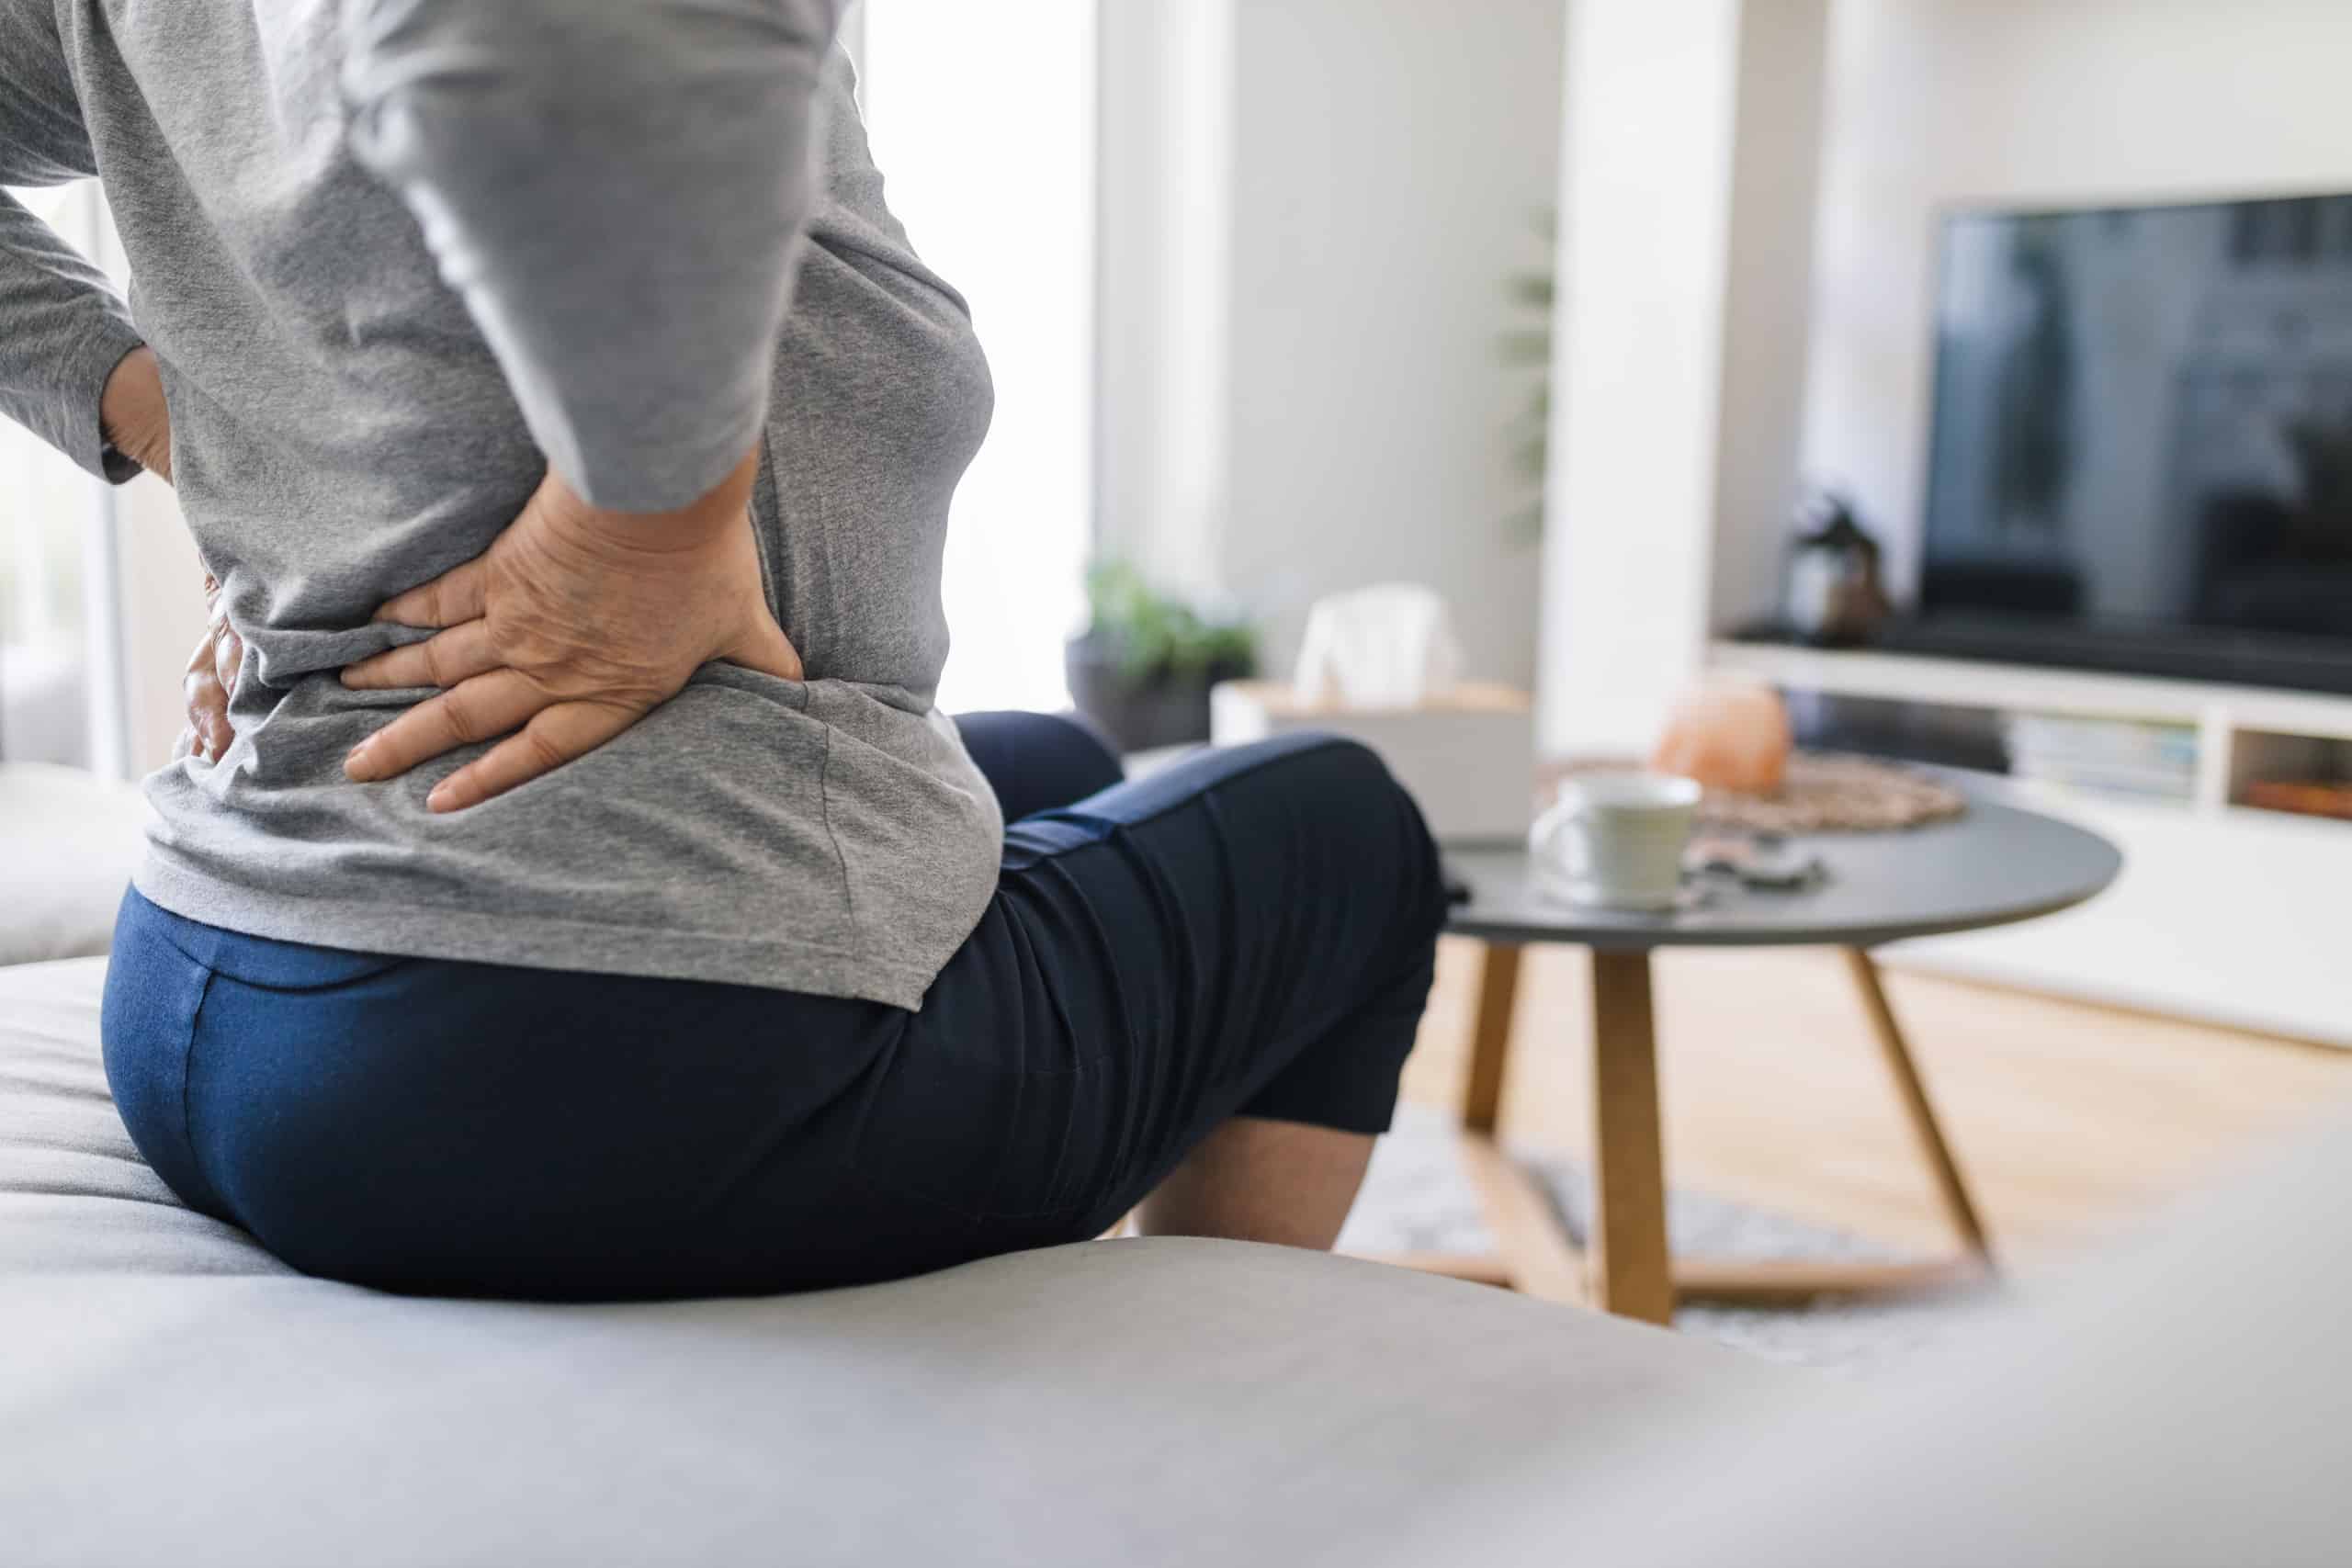 Psychological Factors That Contribute to Back Discomfort